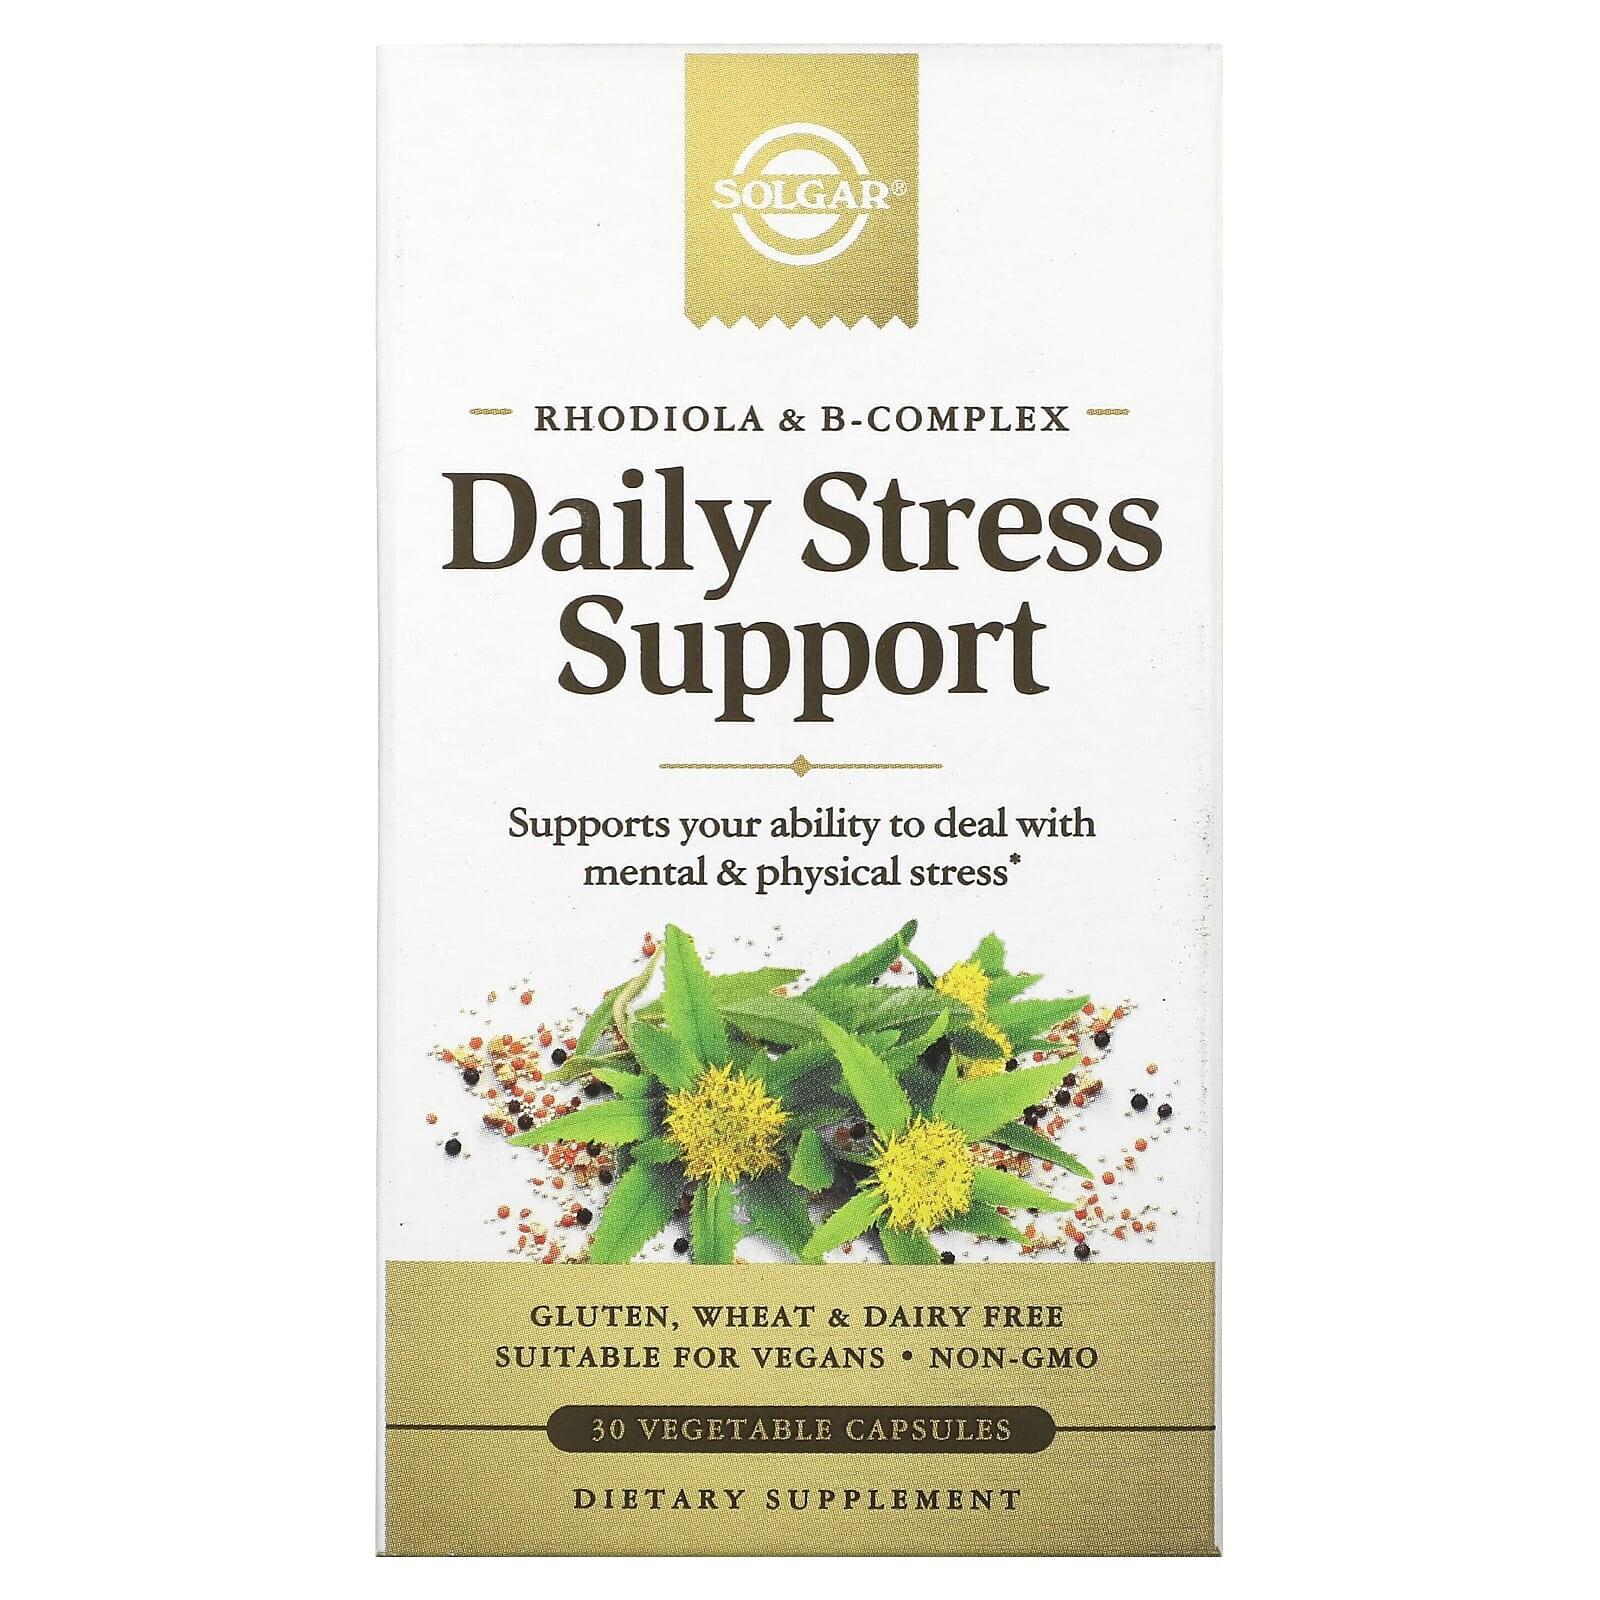 Rhodiola & B-Complex, Daily Stress Support, 30 Vegetable Capsules